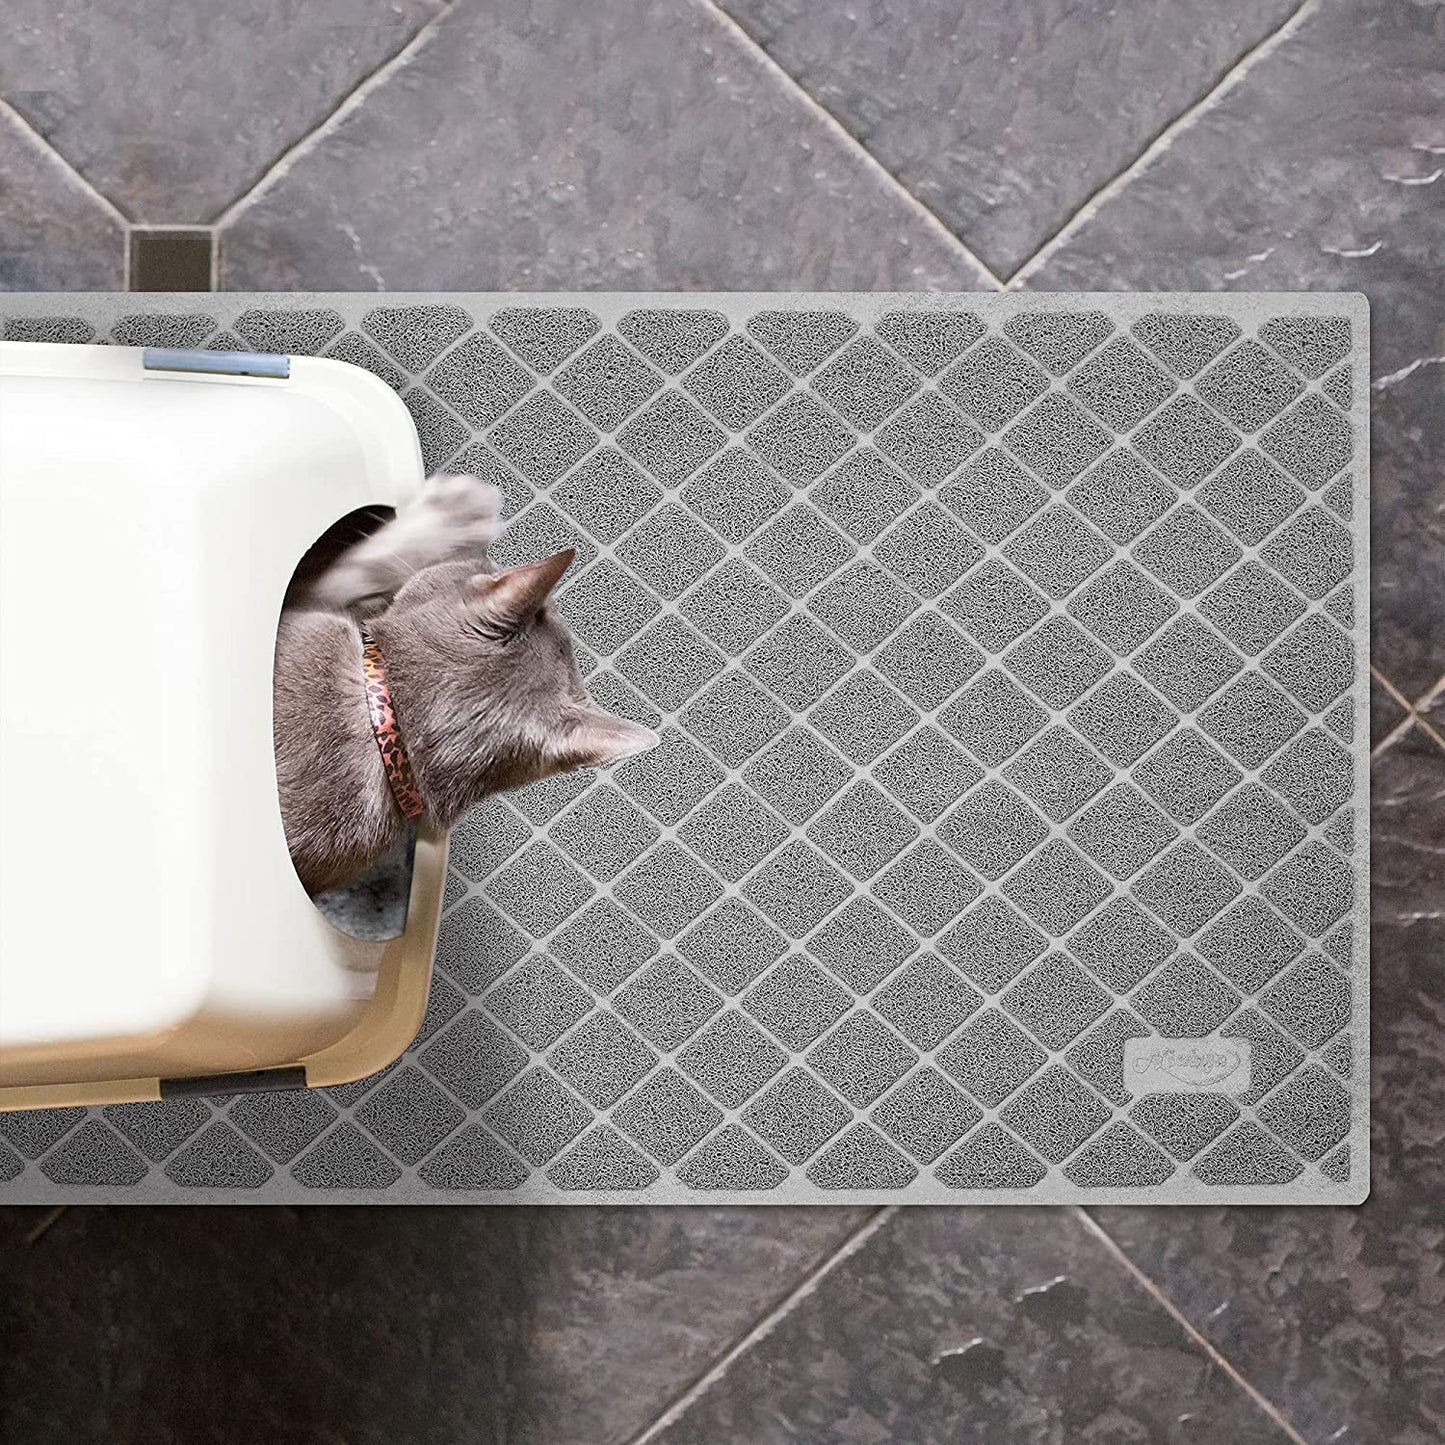 Premium Cat Litter Mat, Litter Box Mat with Non-Slip and Waterproof Backing, Litter Trapping Mat Soft on Kitty Paws and Easy to Clean, Cat Mat Traps Litter from Box